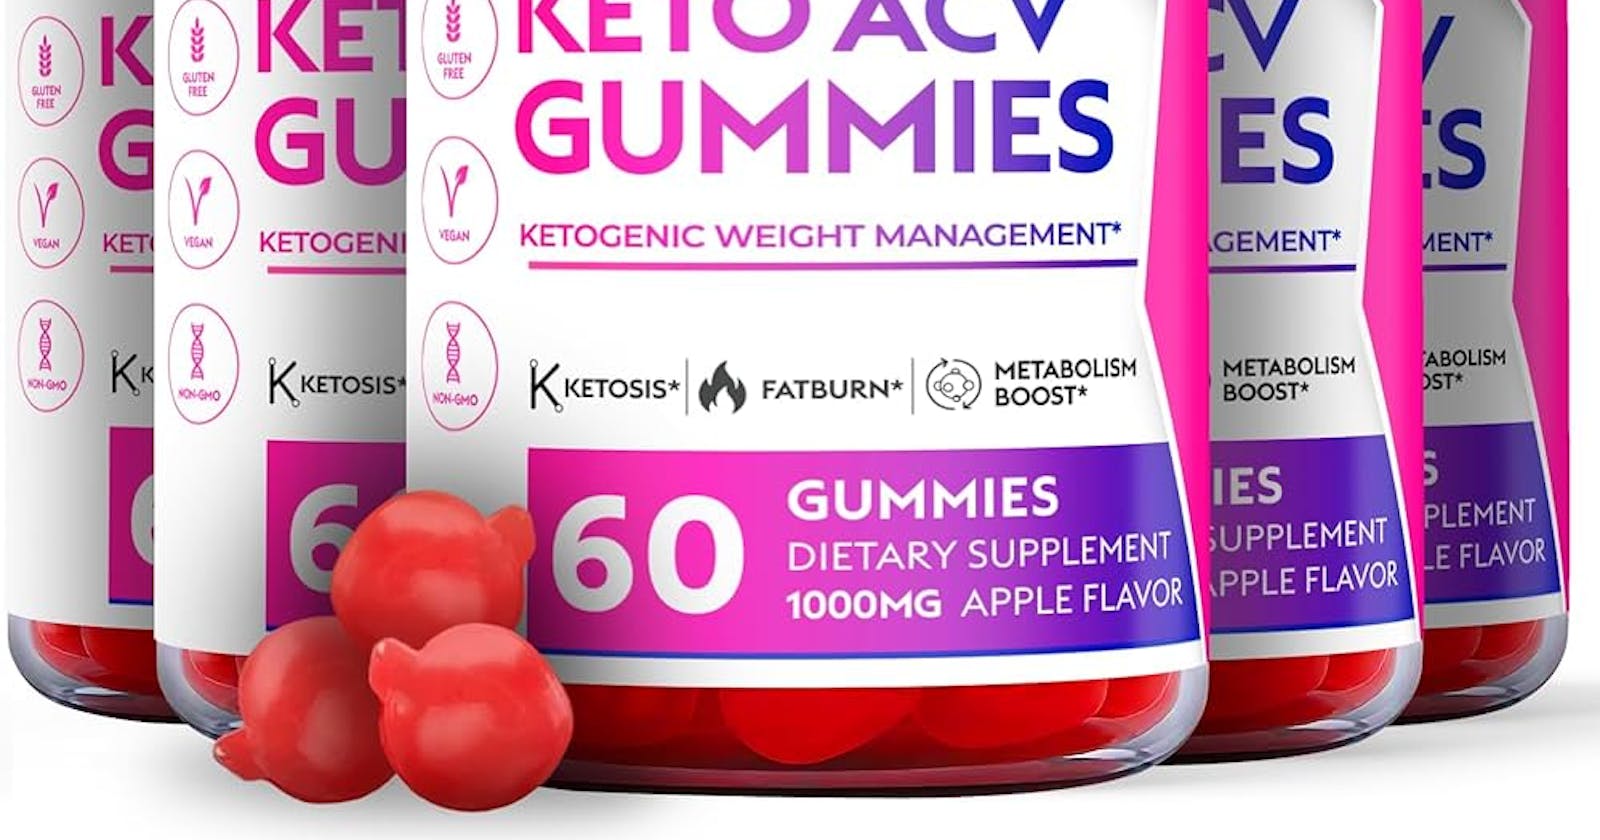 Summer Keto ACV Gummies Reviews Advanced, Natural Pain Relief! Where To Buy!